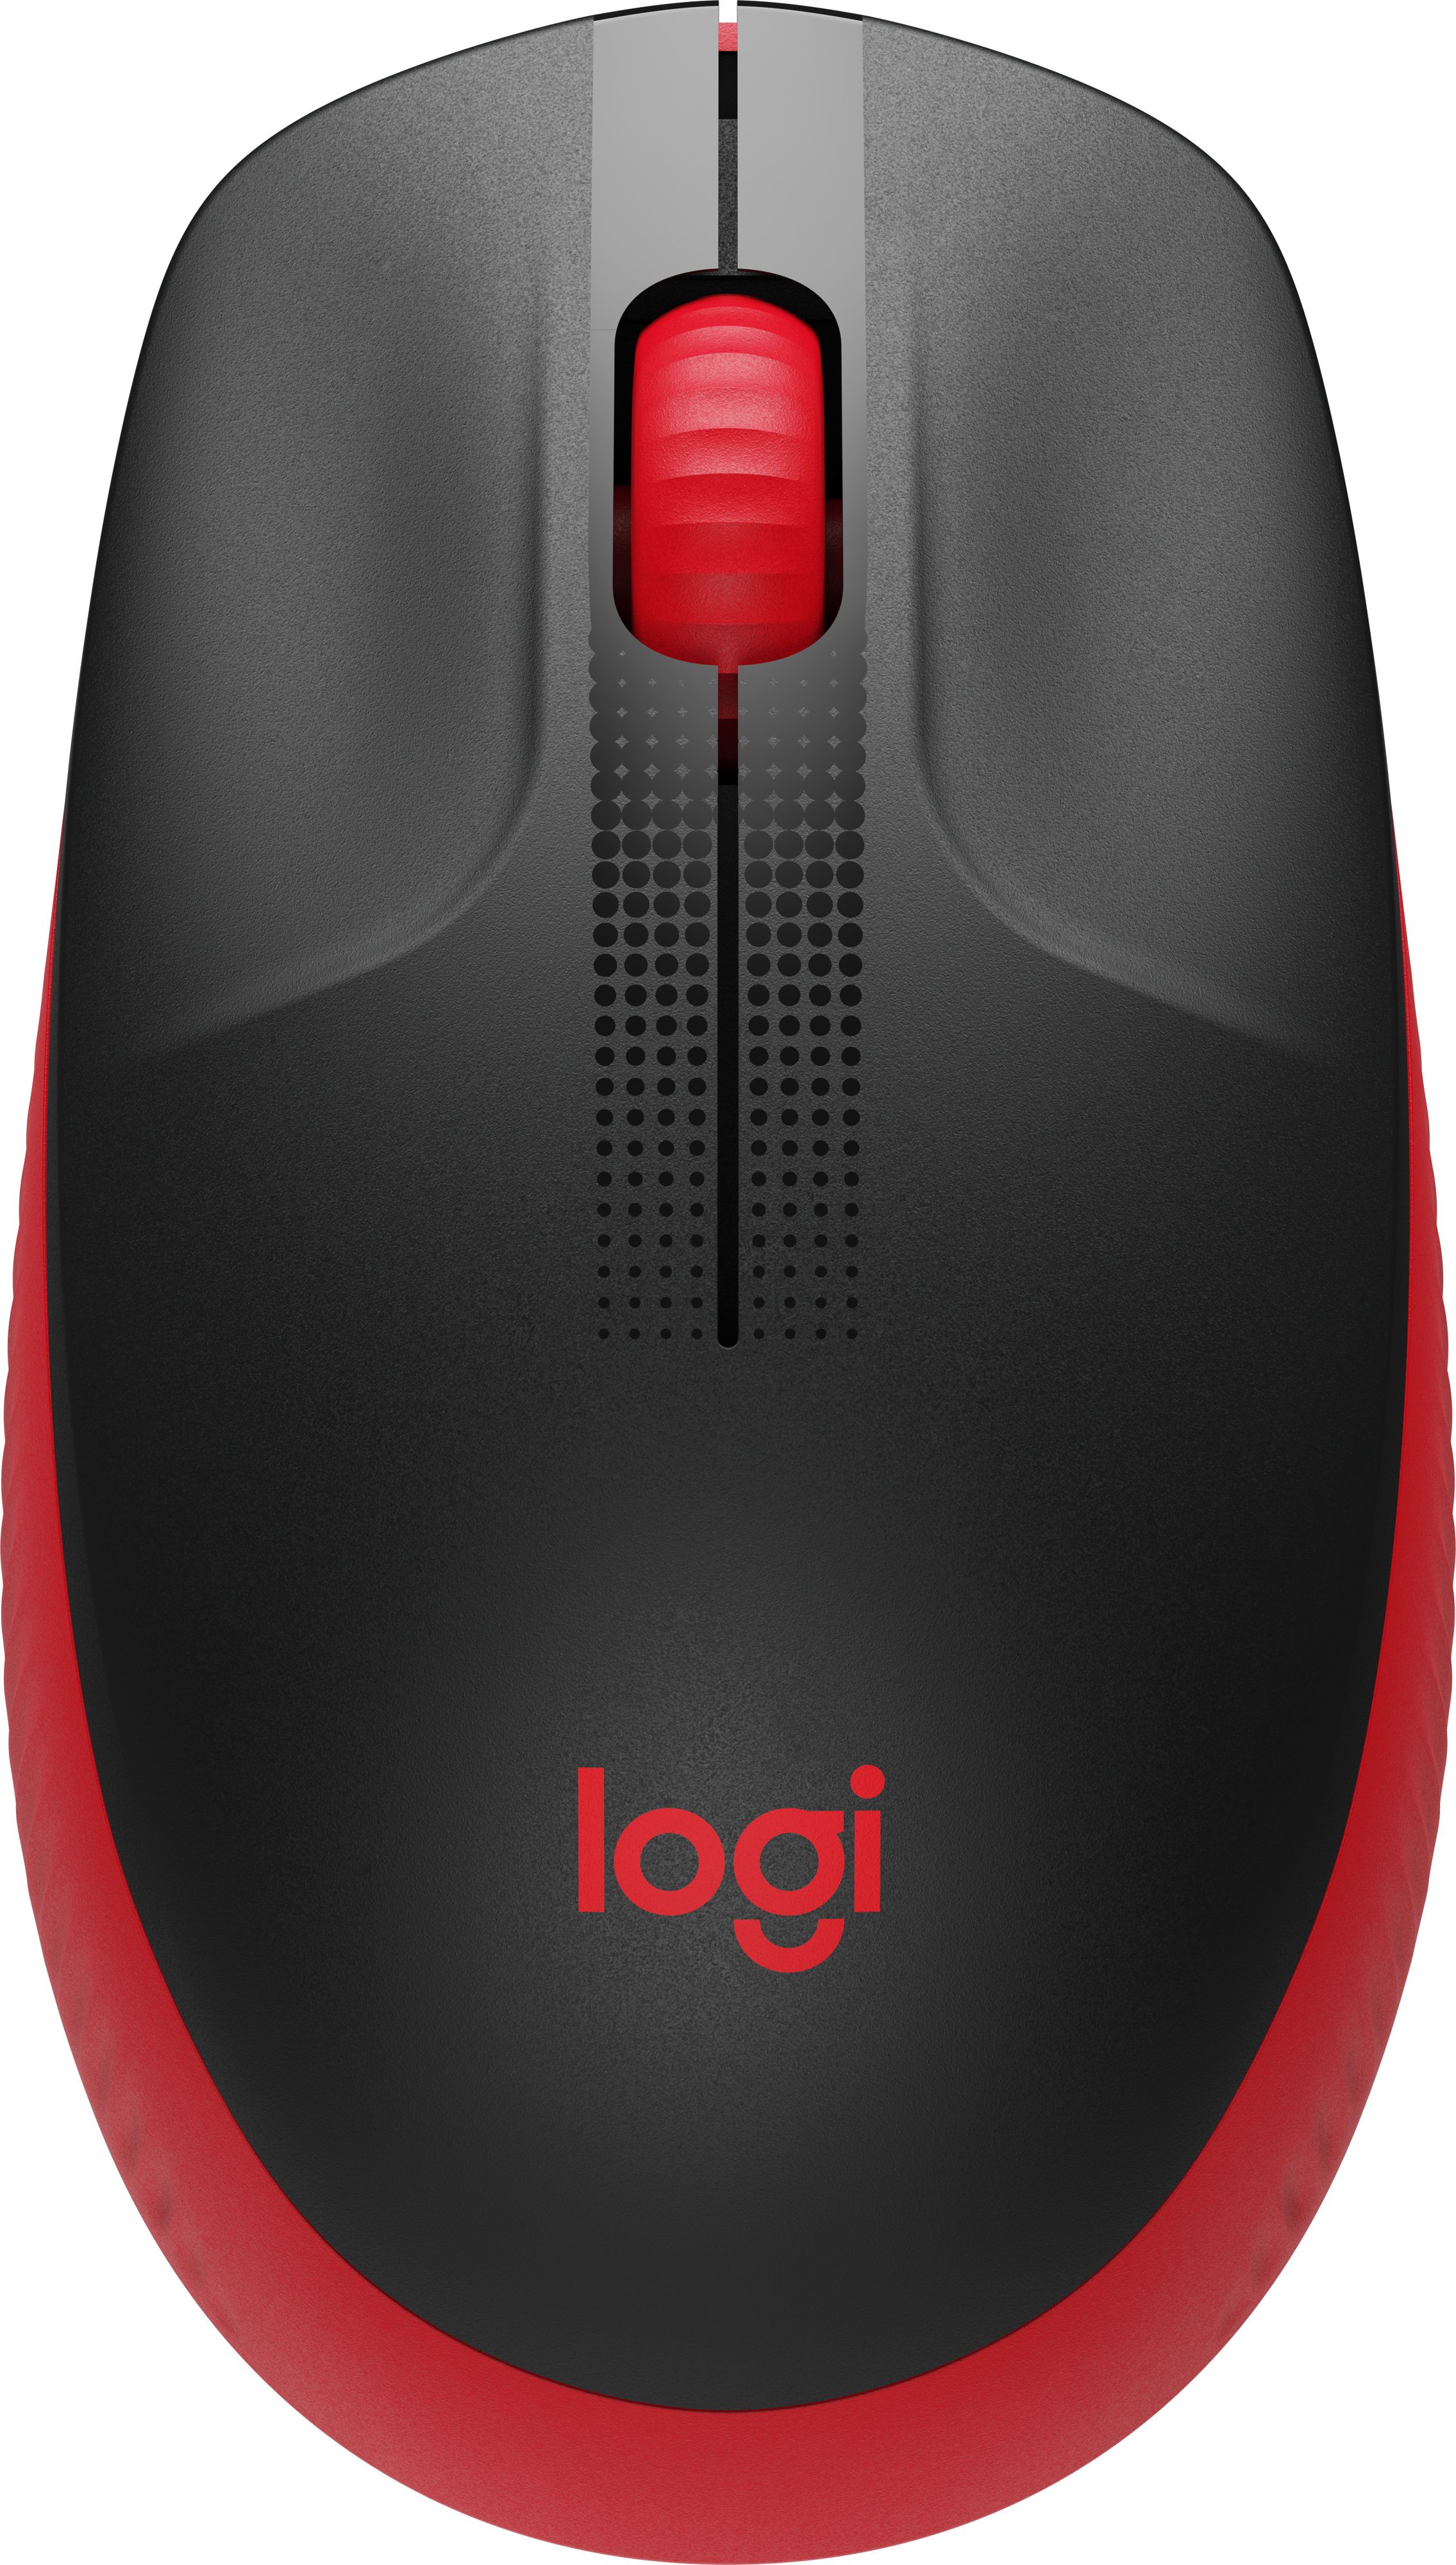 LOGITECH M190 Full-size wireless mouse - RED